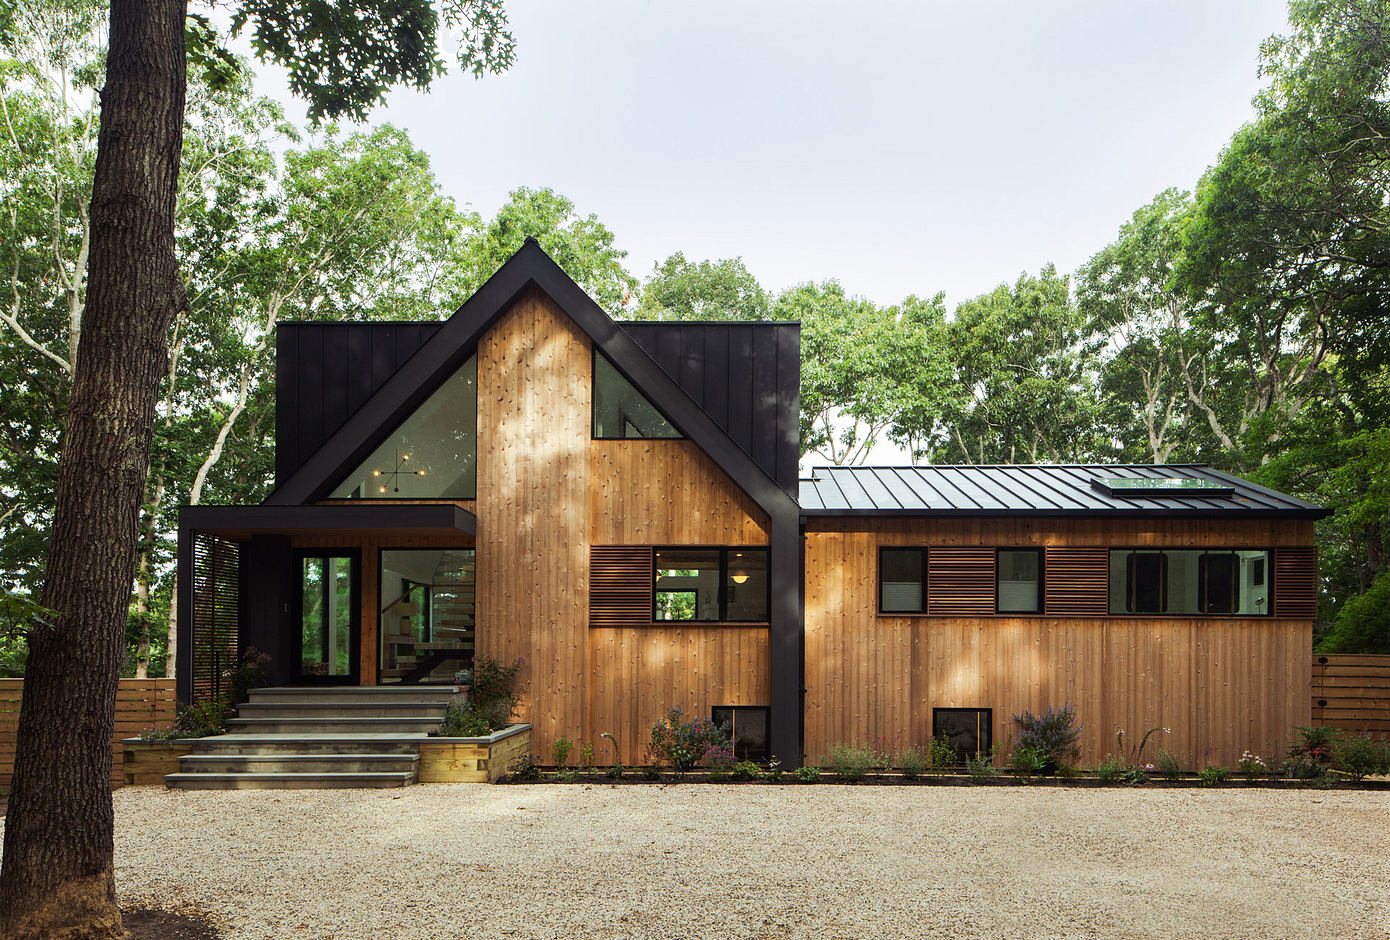 Clearwater: A Modern Renovation of a 1970s Rustic House